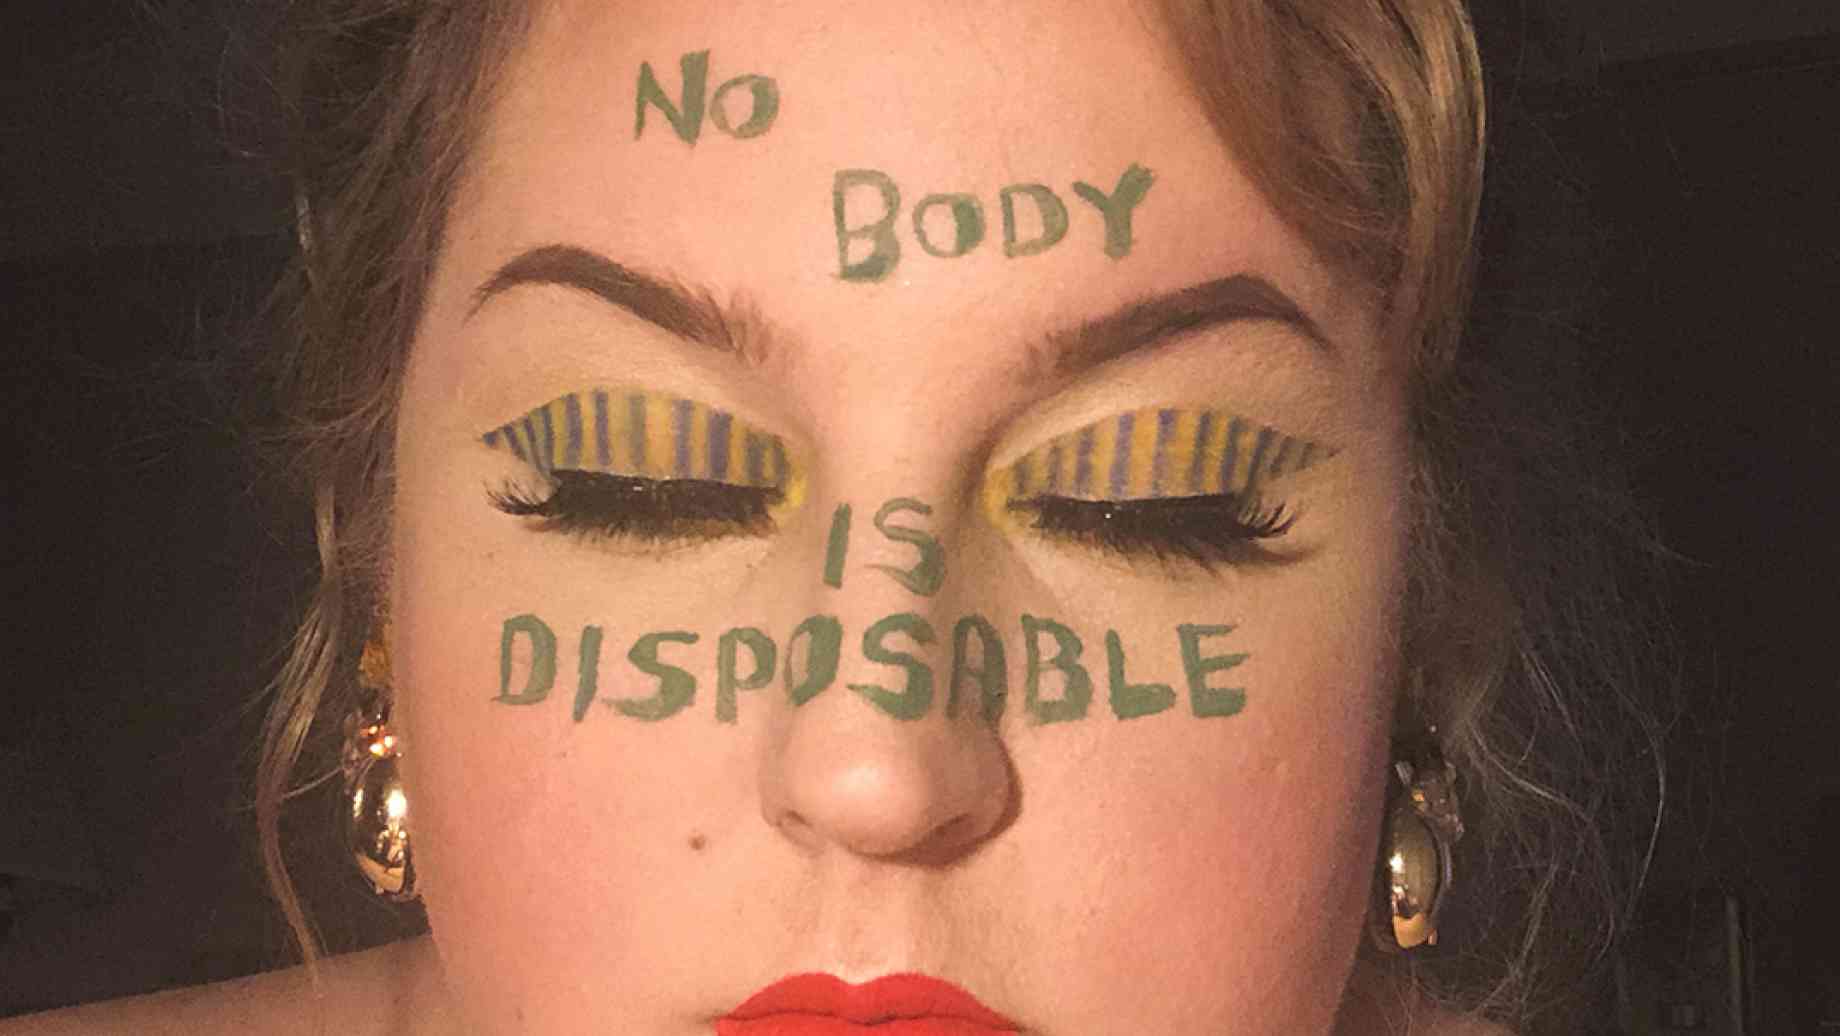 A woman with bare shoulders, a bolo necklace and gold earrings faces the camera with eyes closed. On her face in gold and green writing are the words "No Body is Disposable." Her eyelids are striped in the same colors.